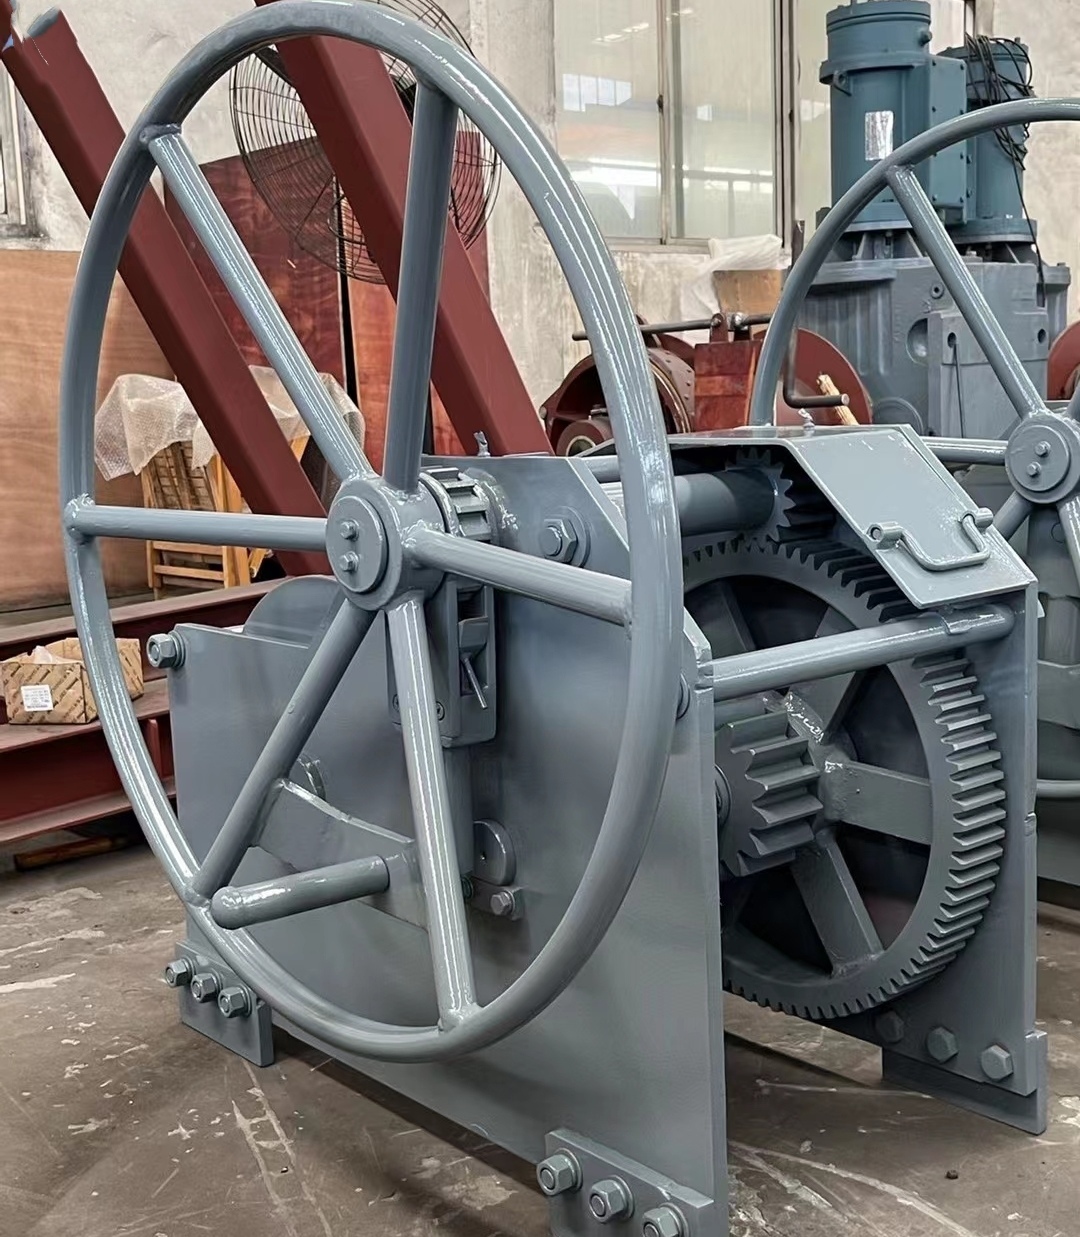 20 sets of 2.5 ton manual winches shipped to Congo